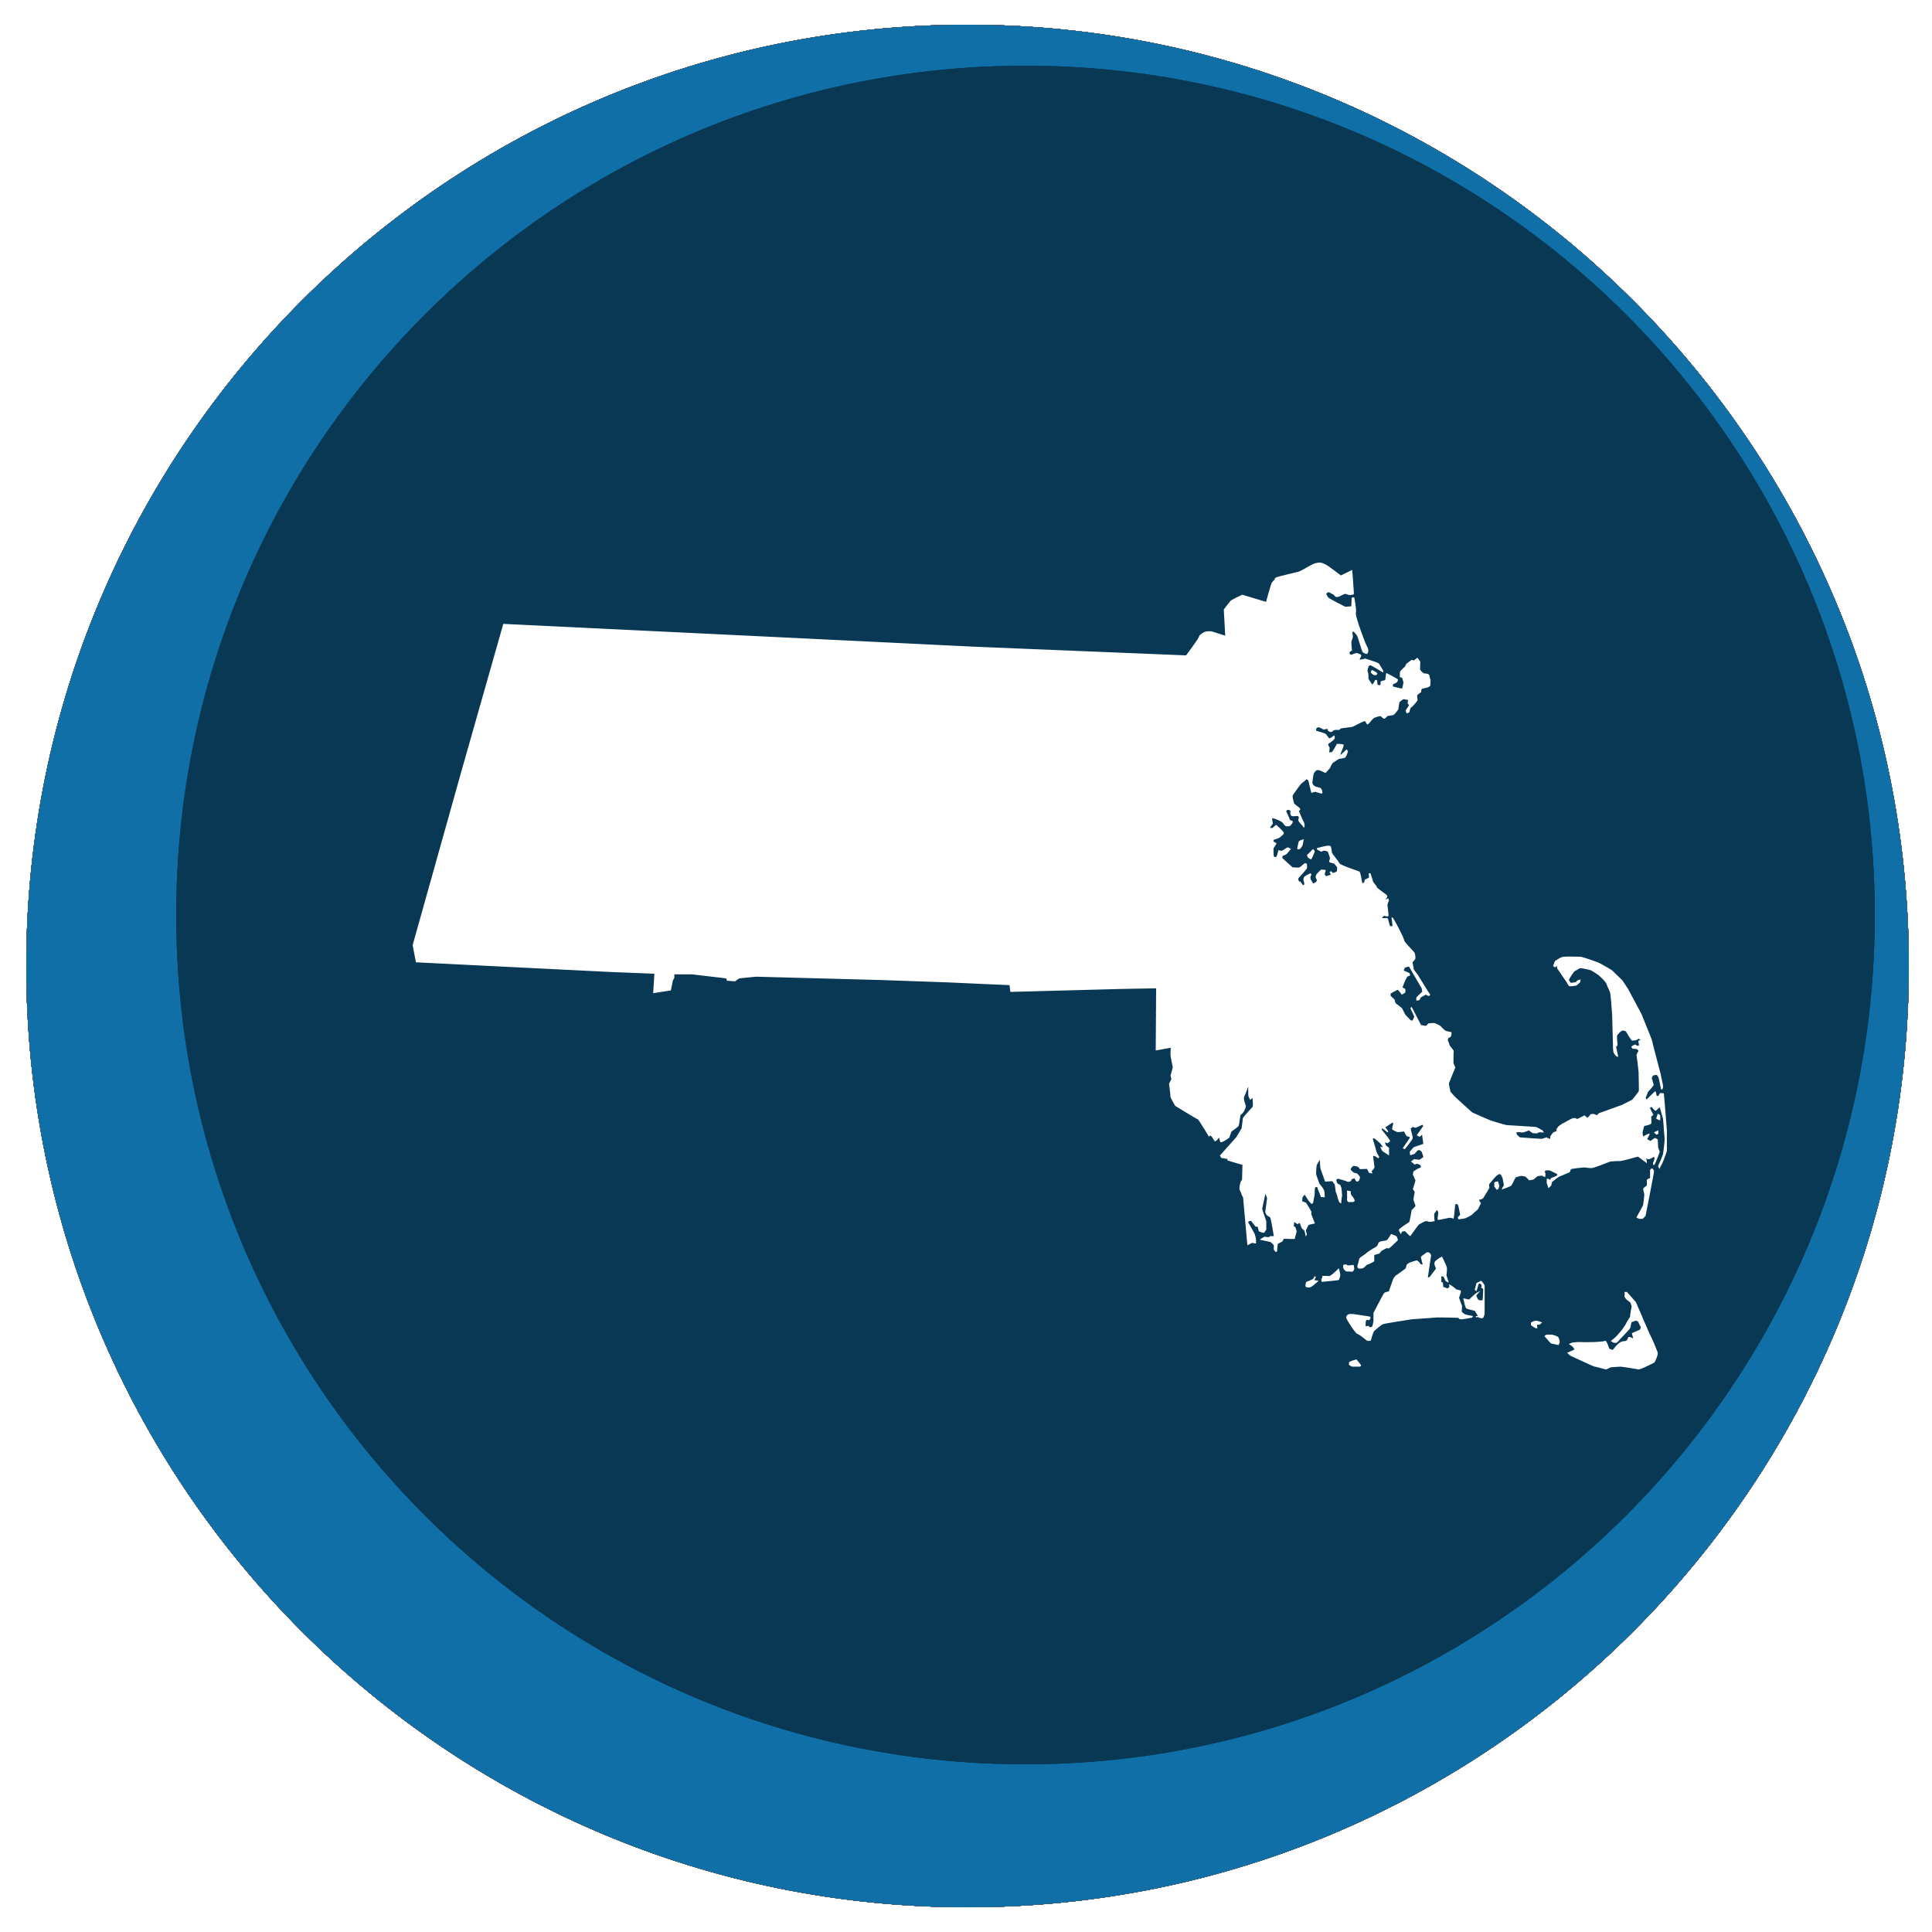 Massachusetts state shape in a circle